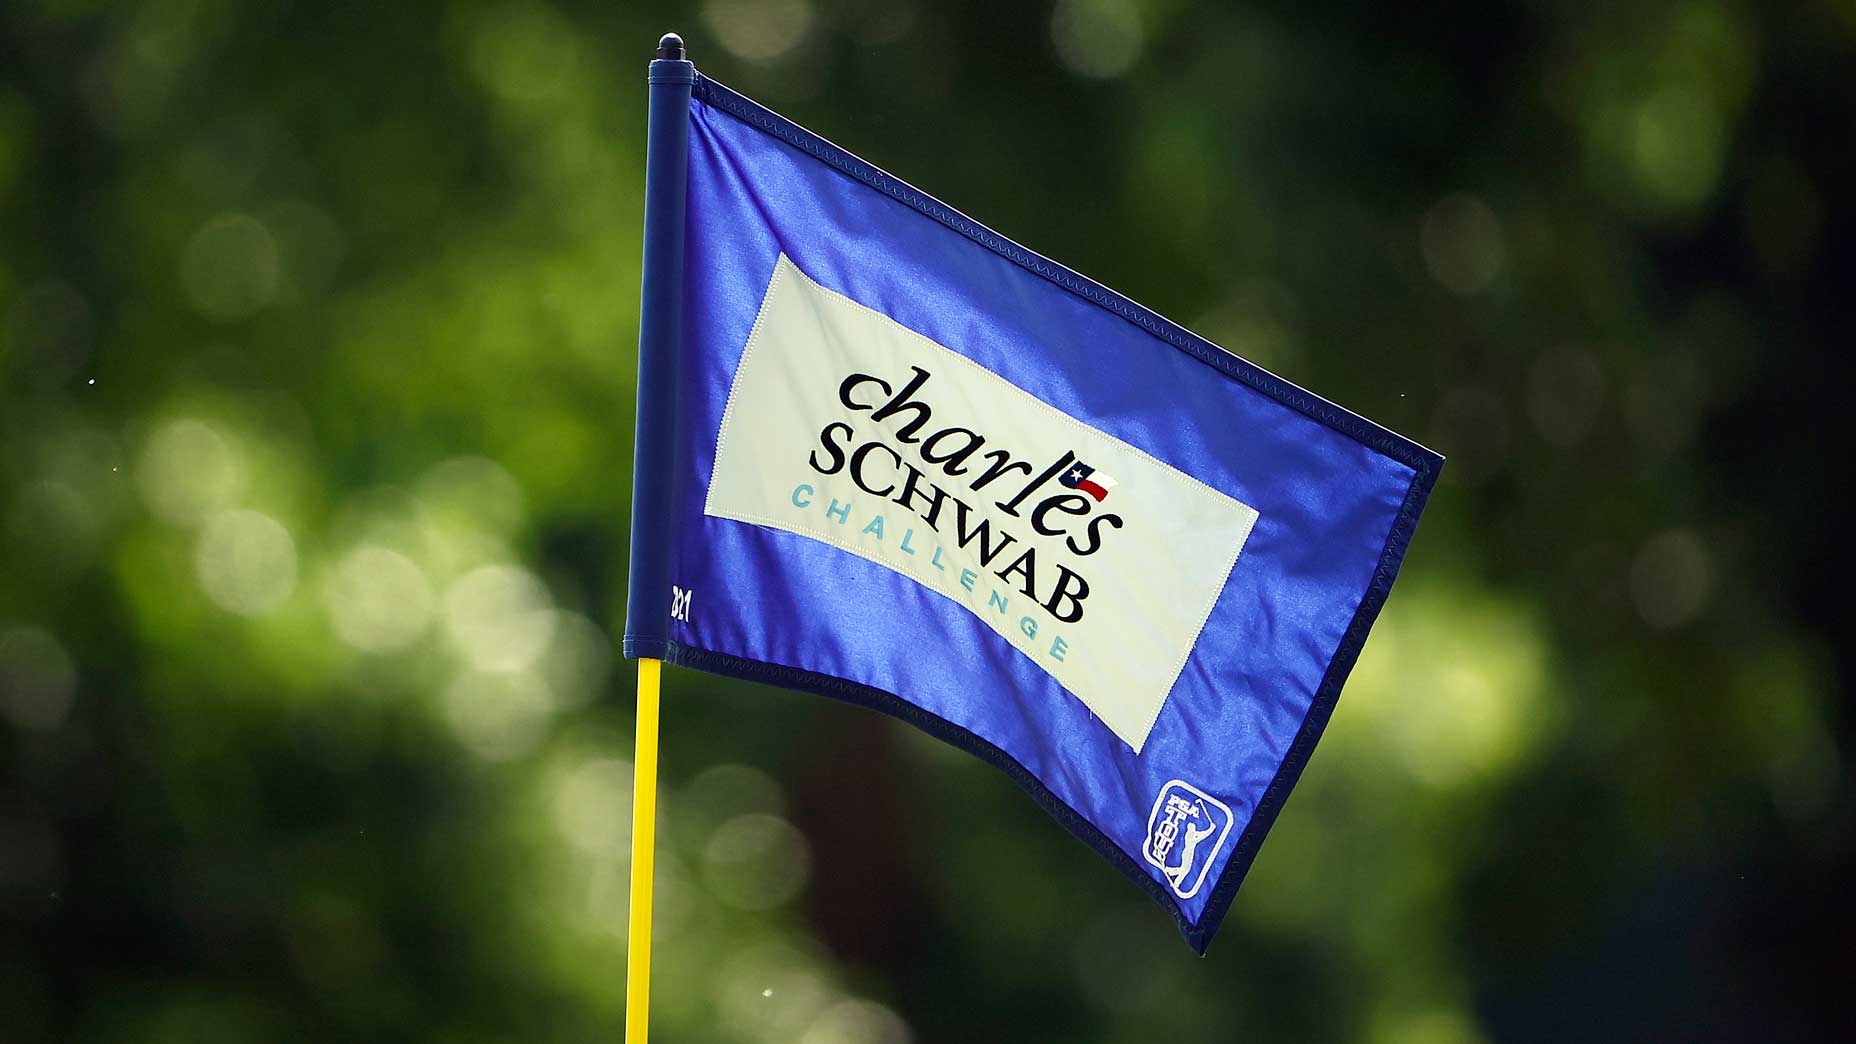 A Charles Schwab Challenge pin flag is pictured at Colonial Country Club